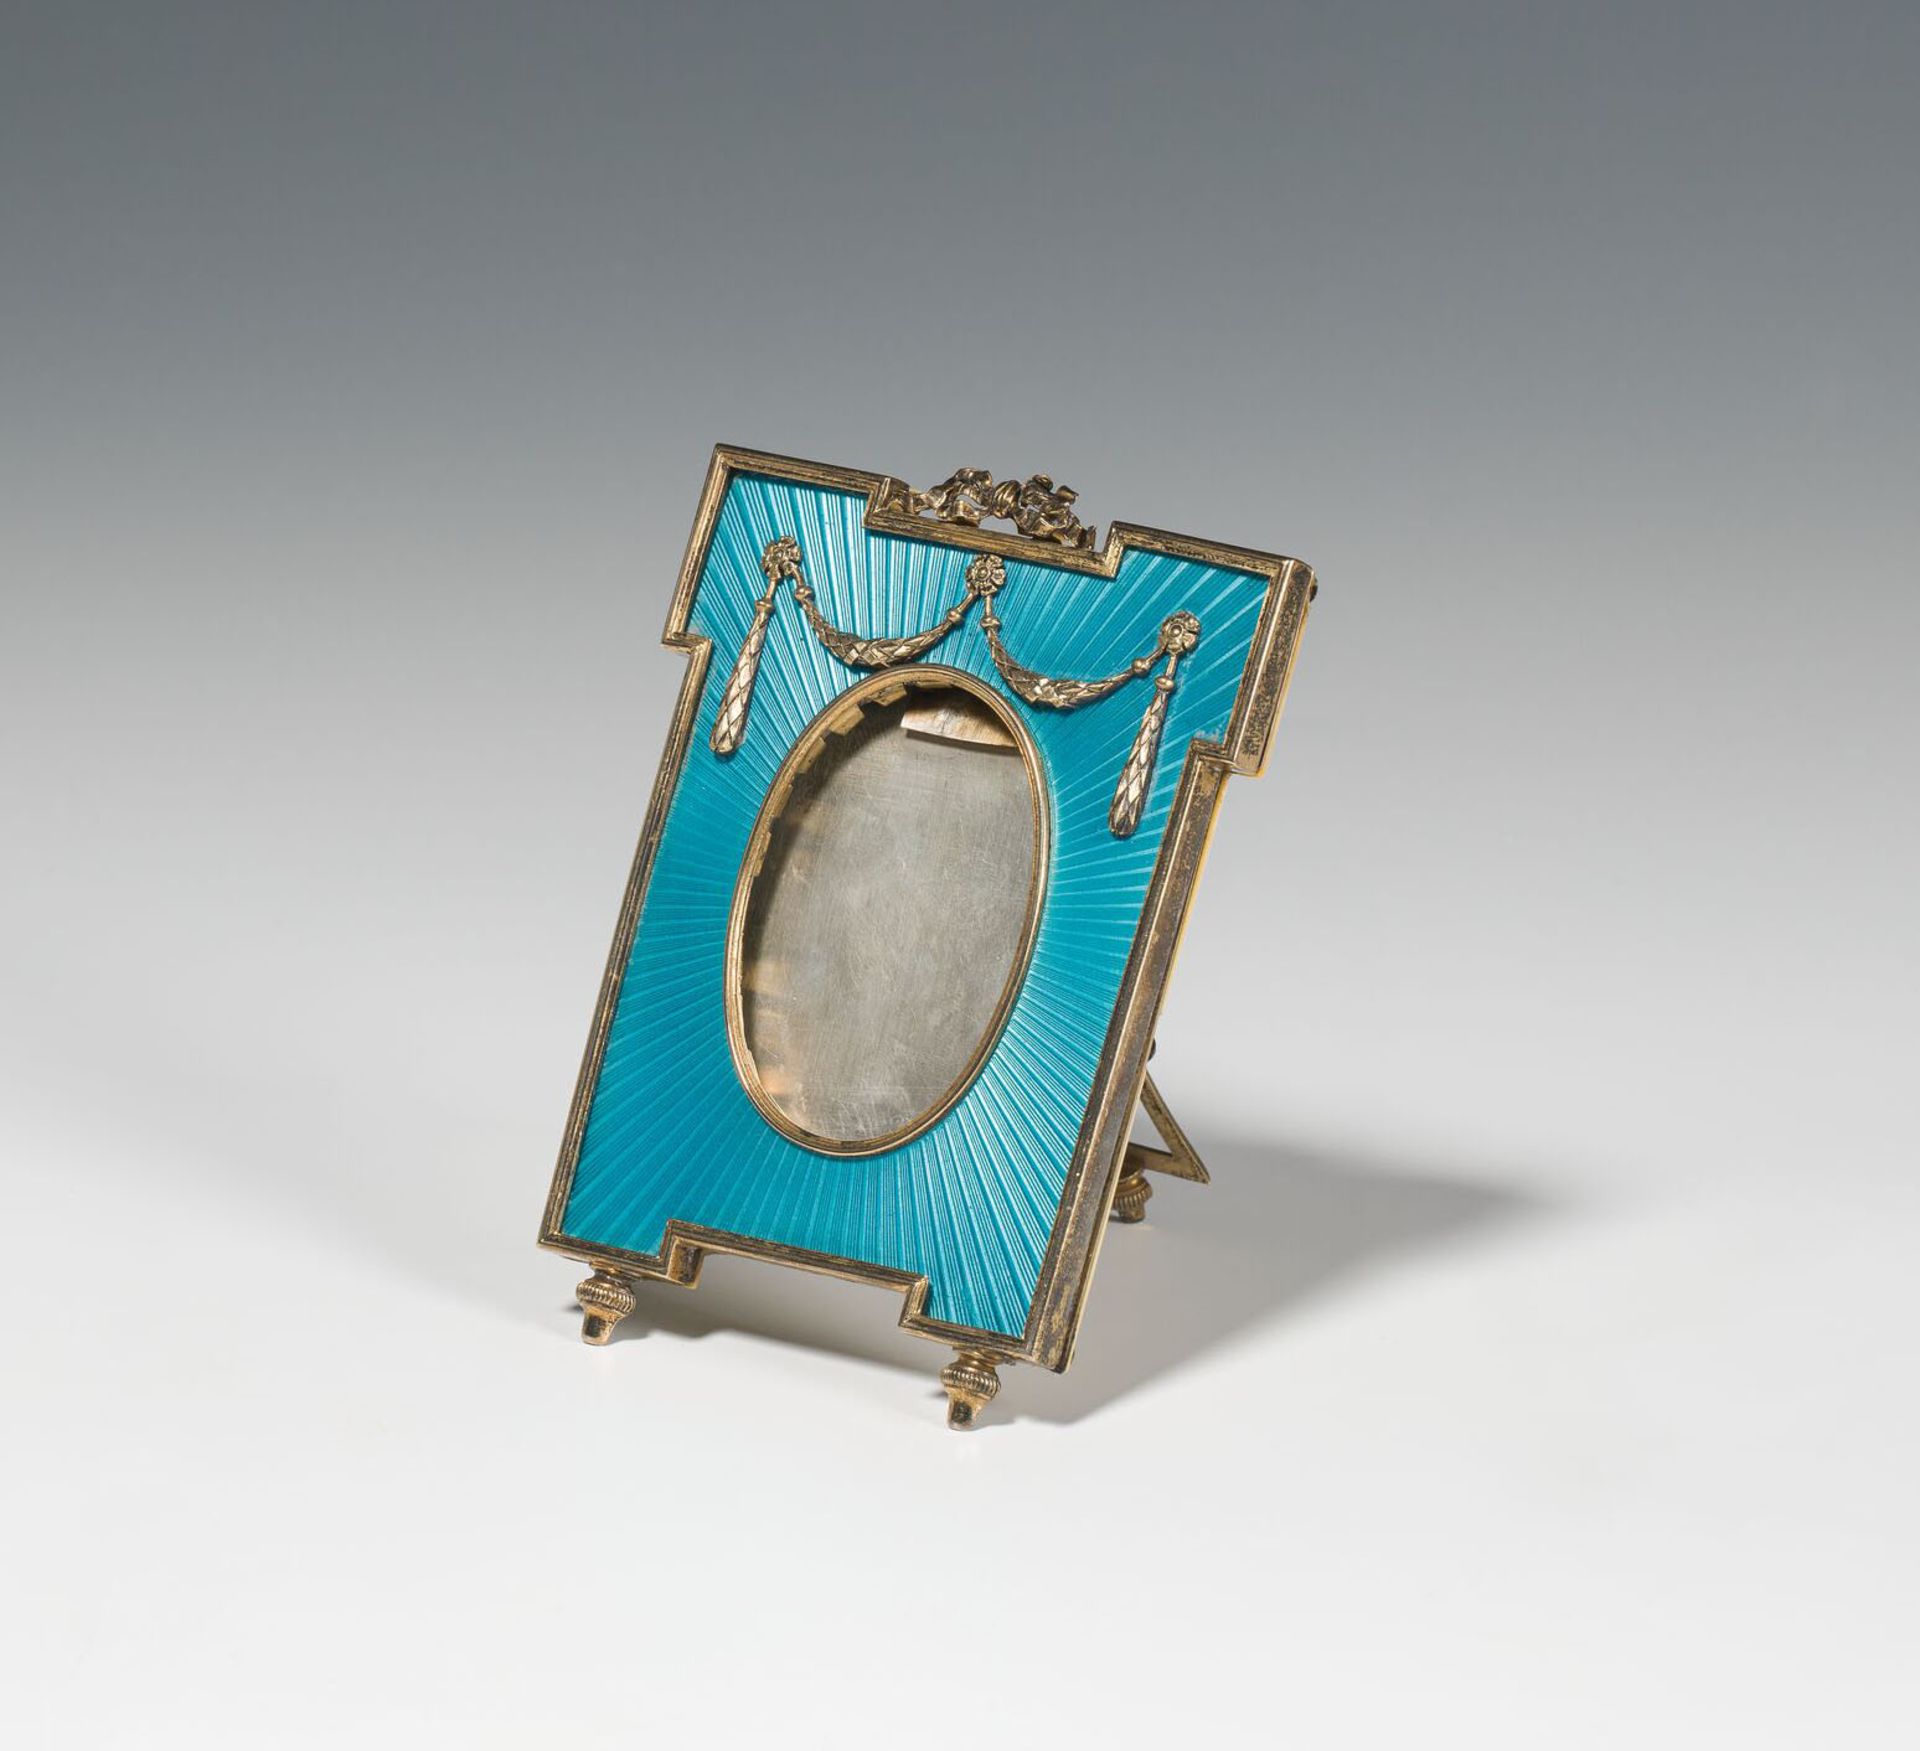 FabergéFrameSt. Petersburg, late 19th centurysilver, gilded; enamel; marked on the bottom and